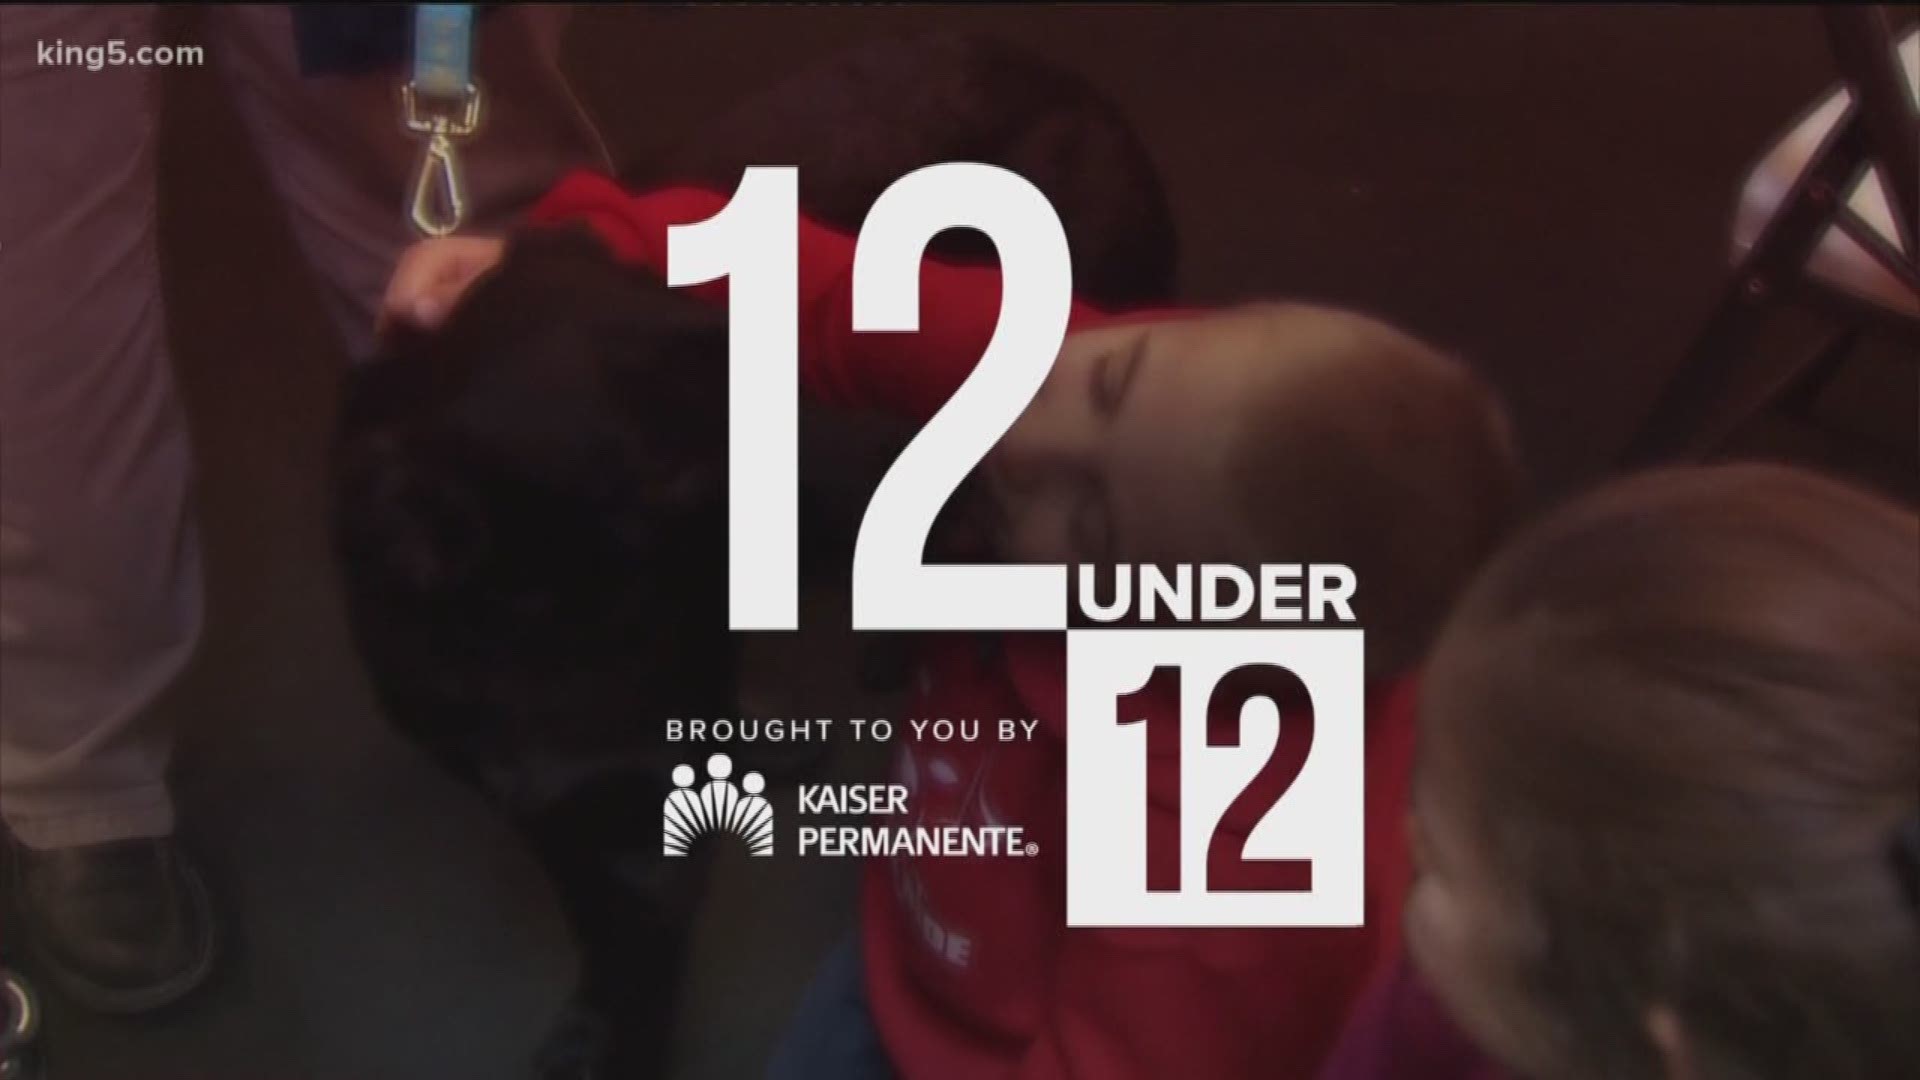 Sponsored by Kaiser Permanente. In this 30 minute special, KING 5 Evening's Kim Holcomb introduces us to the winners of the first "12 Under 12" contest on Evening. Meet a dozen kids who inspire, amaze and uplift their communities.